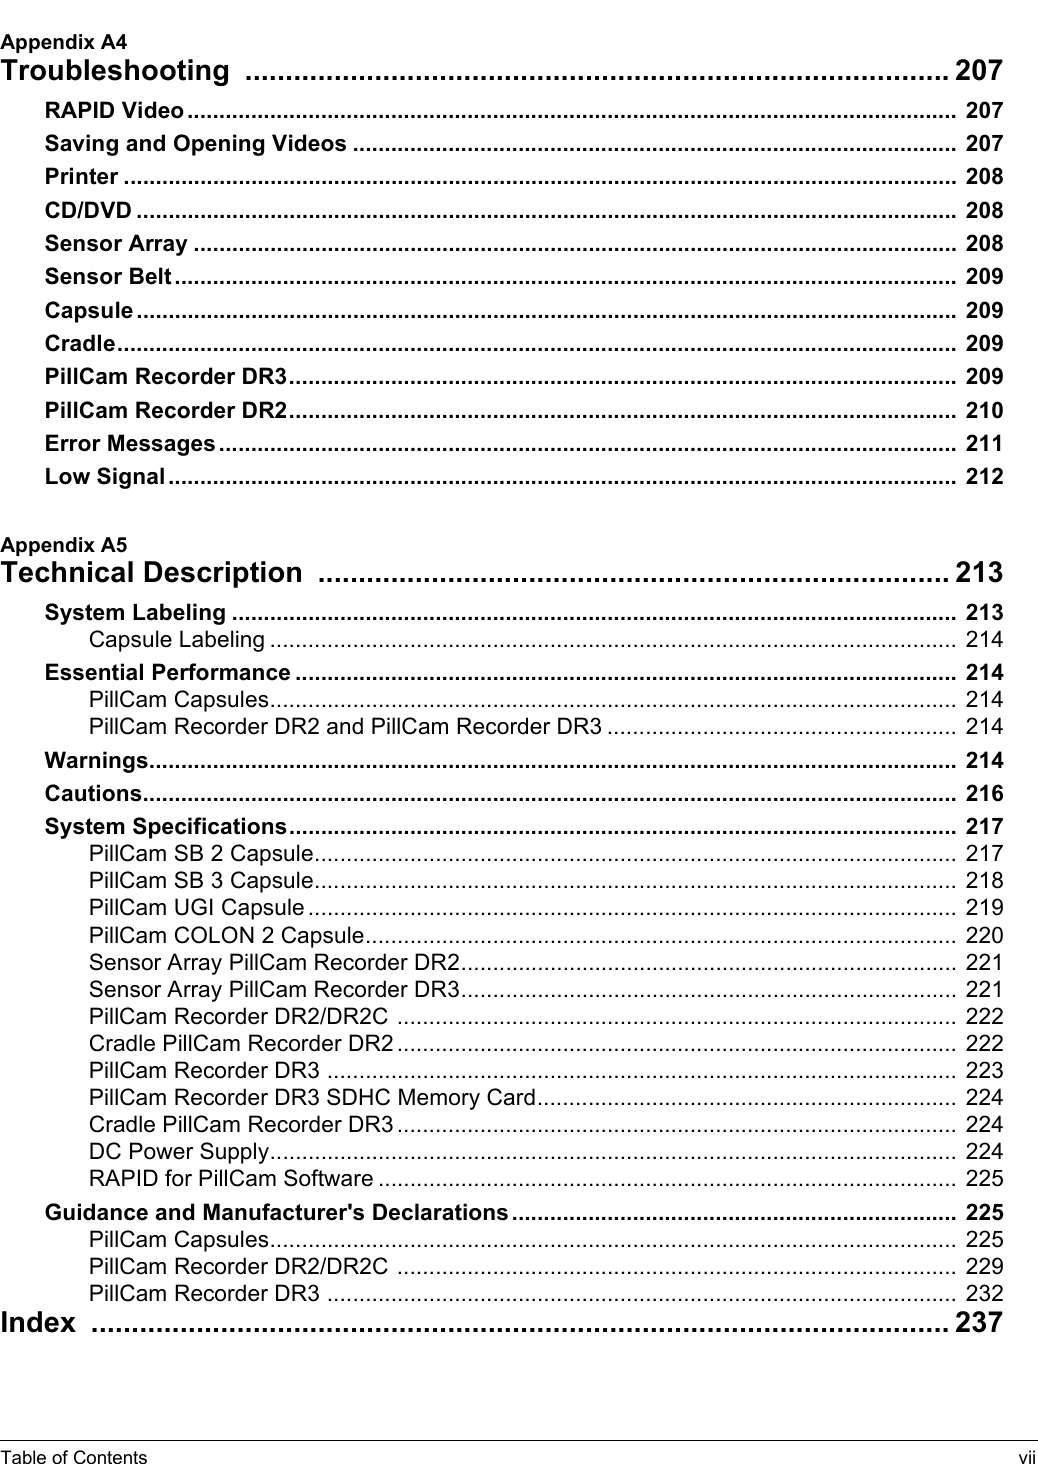 Table of Contents viiAppendix A4Troubleshooting  ....................................................................................... 207RAPID Video ......................................................................................................................... 207Saving and Opening Videos ............................................................................................... 207Printer ................................................................................................................................... 208CD/DVD ................................................................................................................................. 208Sensor Array ........................................................................................................................ 208Sensor Belt ...........................................................................................................................  209Capsule ................................................................................................................................. 209Cradle....................................................................................................................................  209PillCam Recorder DR3......................................................................................................... 209PillCam Recorder DR2......................................................................................................... 210Error Messages ....................................................................................................................  211Low Signal ............................................................................................................................ 212Appendix A5Technical Description  .............................................................................. 213System Labeling .................................................................................................................. 213Capsule Labeling ............................................................................................................ 214Essential Performance ........................................................................................................ 214PillCam Capsules............................................................................................................  214PillCam Recorder DR2 and PillCam Recorder DR3 .......................................................  214Warnings............................................................................................................................... 214Cautions................................................................................................................................ 216System Specifications......................................................................................................... 217PillCam SB 2 Capsule.....................................................................................................  217PillCam SB 3 Capsule.....................................................................................................  218PillCam UGI Capsule ......................................................................................................  219PillCam COLON 2 Capsule.............................................................................................  220Sensor Array PillCam Recorder DR2.............................................................................. 221Sensor Array PillCam Recorder DR3.............................................................................. 221PillCam Recorder DR2/DR2C ........................................................................................  222Cradle PillCam Recorder DR2 ........................................................................................ 222PillCam Recorder DR3 ...................................................................................................  223PillCam Recorder DR3 SDHC Memory Card.................................................................. 224Cradle PillCam Recorder DR3 ........................................................................................ 224DC Power Supply............................................................................................................  224RAPID for PillCam Software ........................................................................................... 225Guidance and Manufacturer&apos;s Declarations ...................................................................... 225PillCam Capsules............................................................................................................  225PillCam Recorder DR2/DR2C ........................................................................................  229PillCam Recorder DR3 ...................................................................................................  232Index  .......................................................................................................... 237